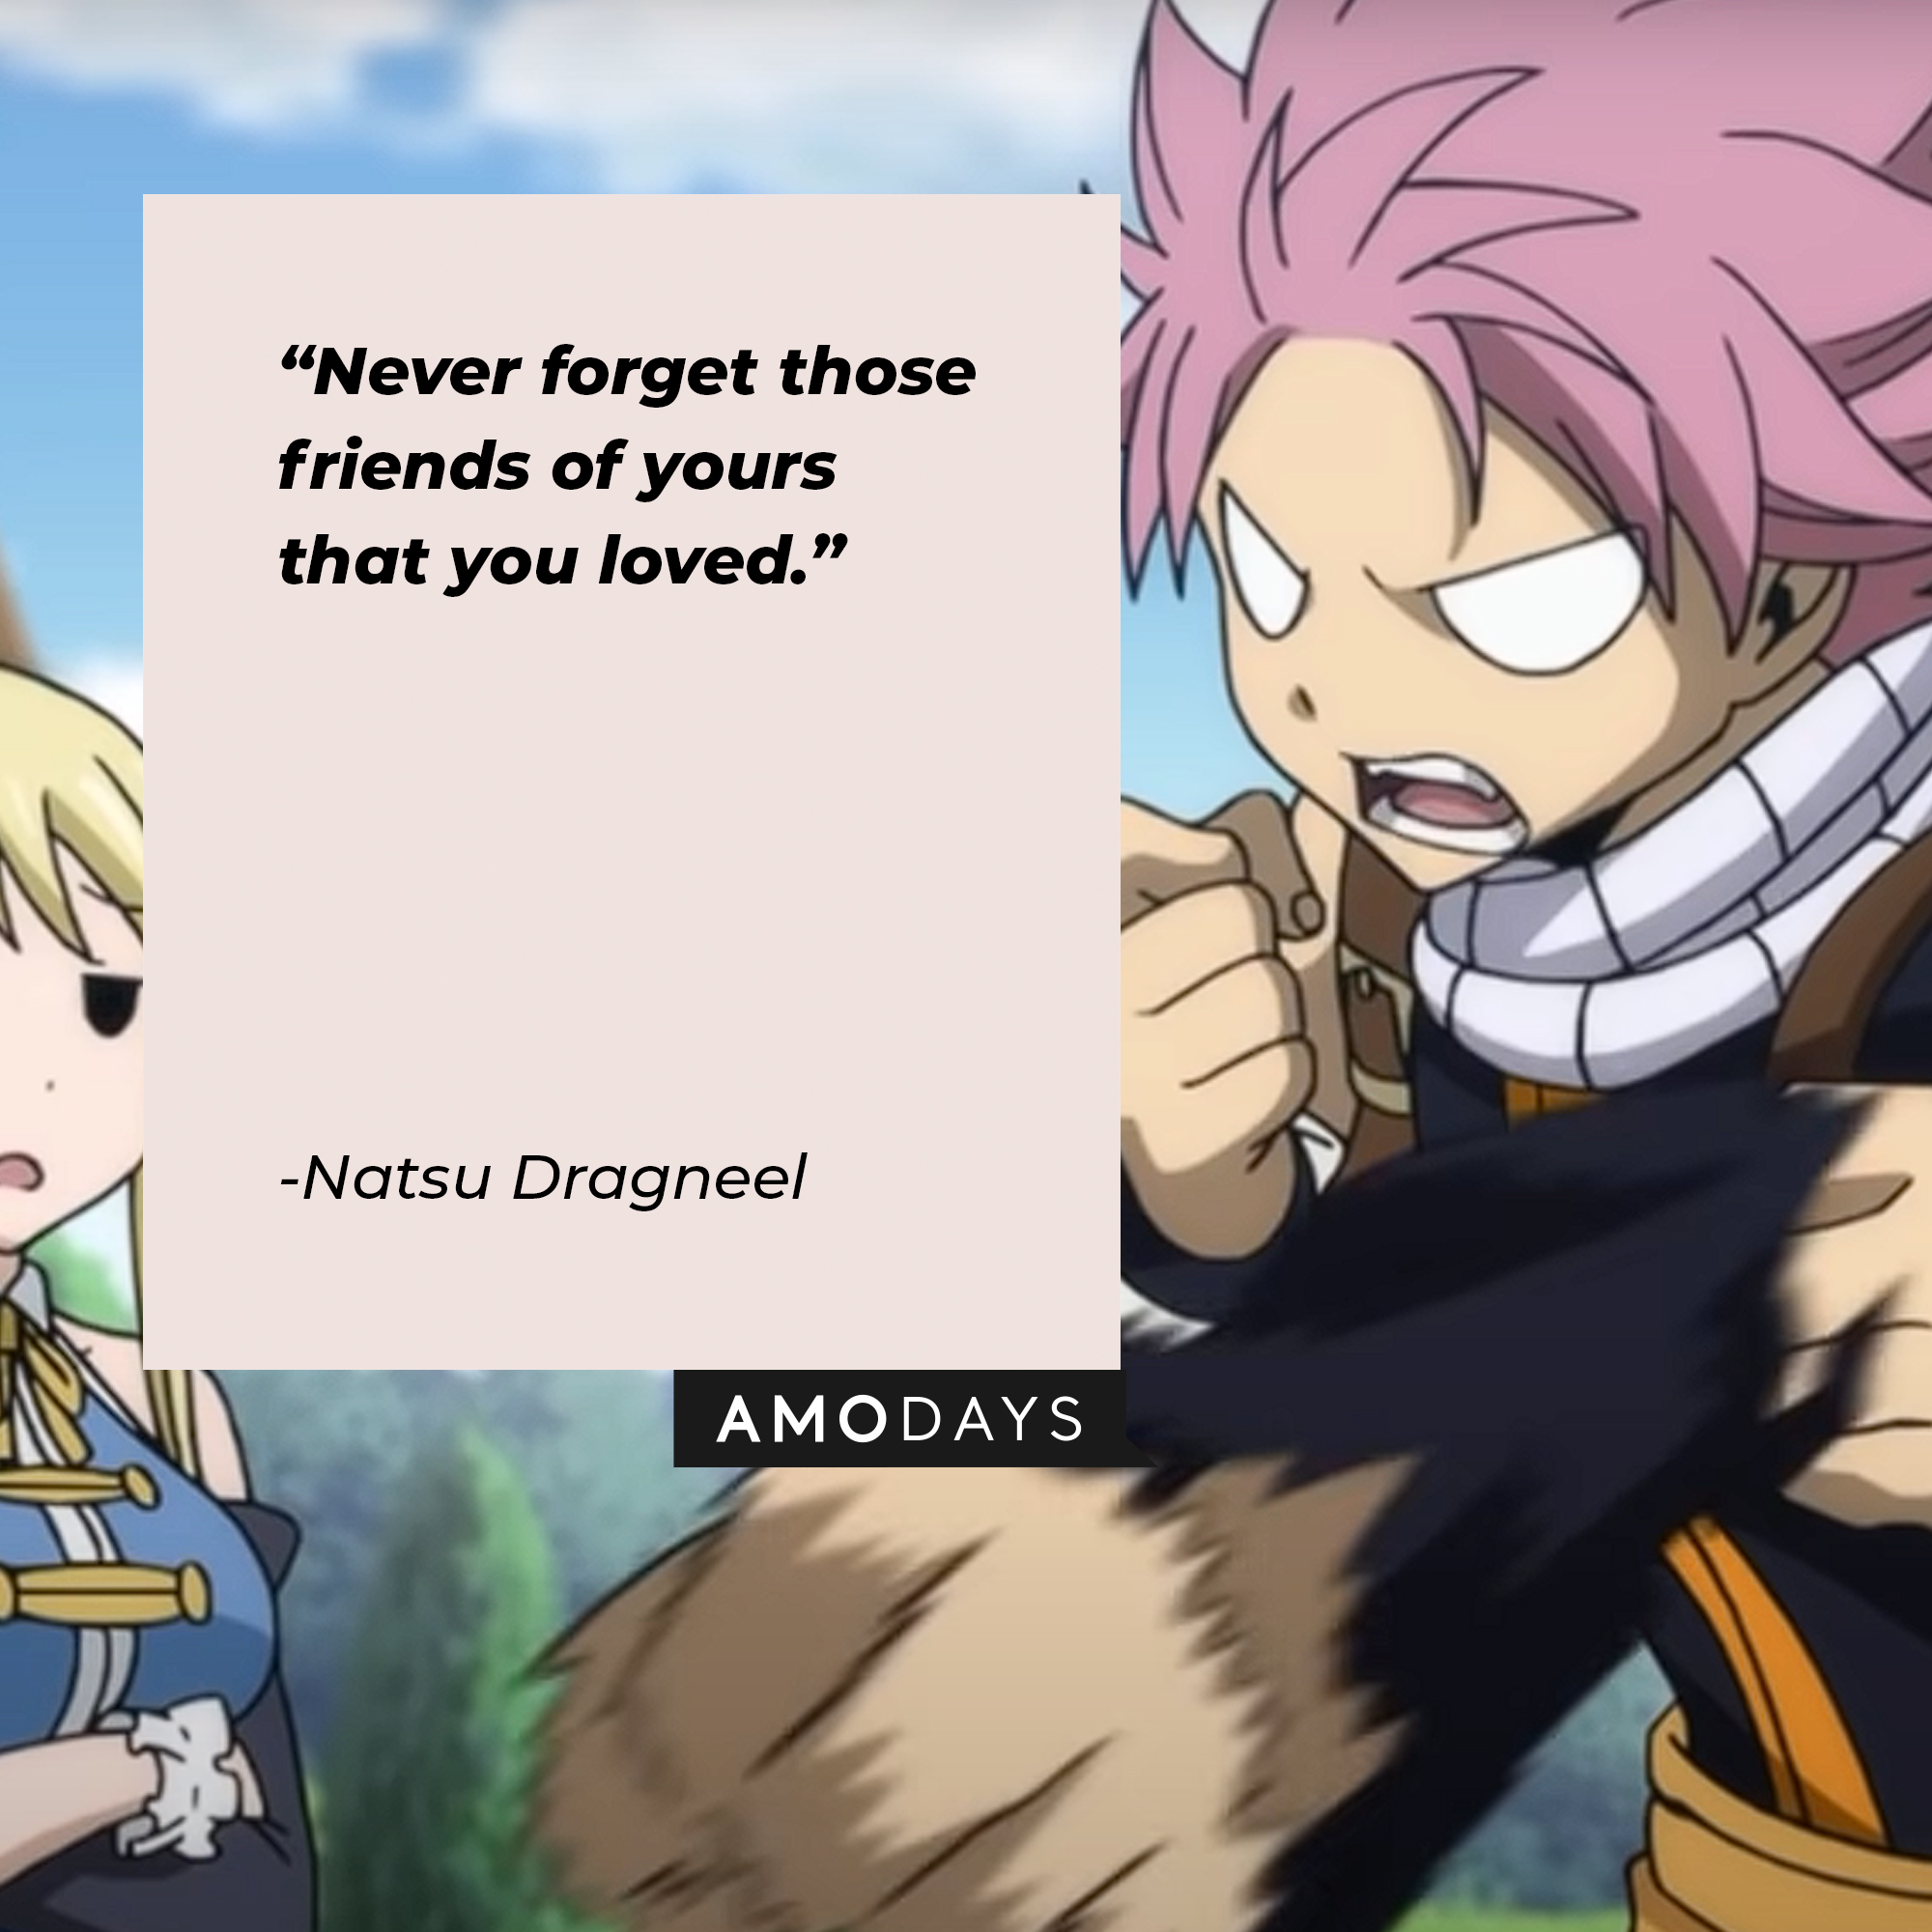 Natsu Dragneel's quote: "Never forget those friends of yours that you loved." | Image: AmoDays